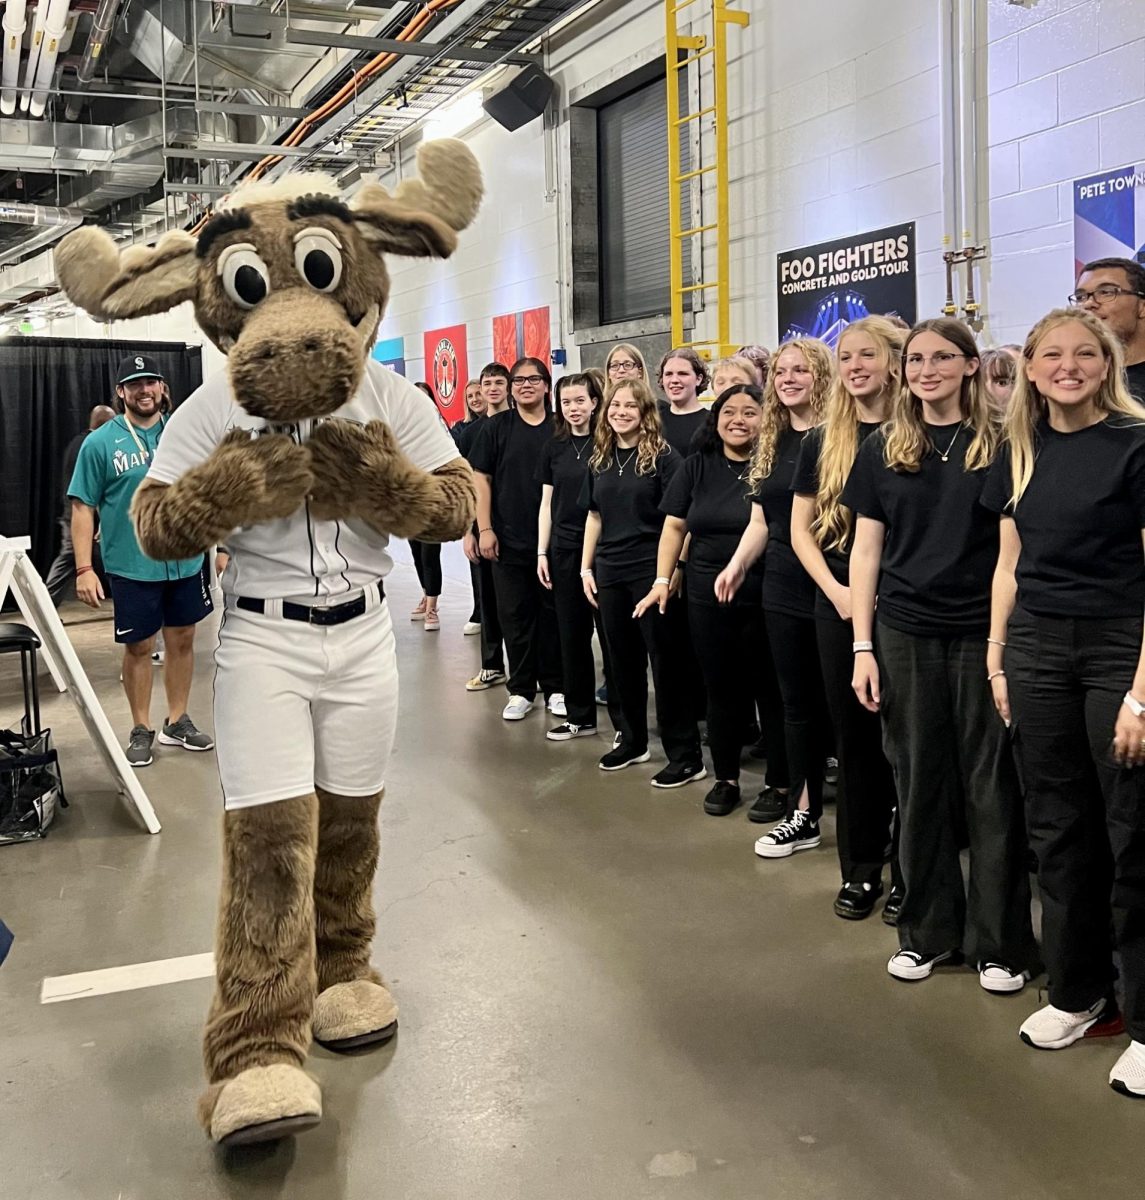 The+Mariners+Moose%2C+who+is+standing+beside+the+Central+Kitsap+Choir.